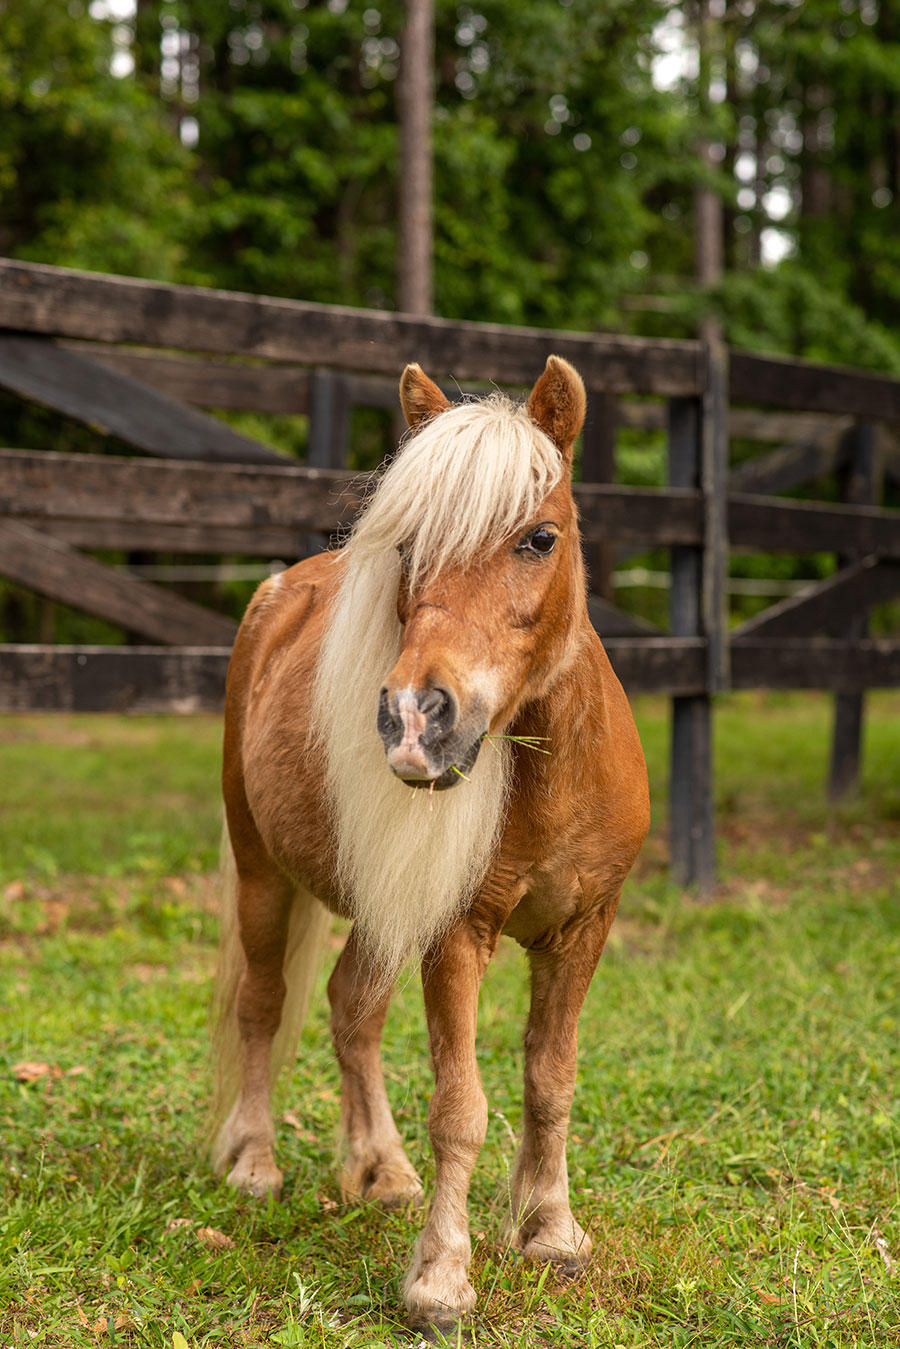 Photo of Jazzy, a horse at Faith Equestrian Therapeutic Center